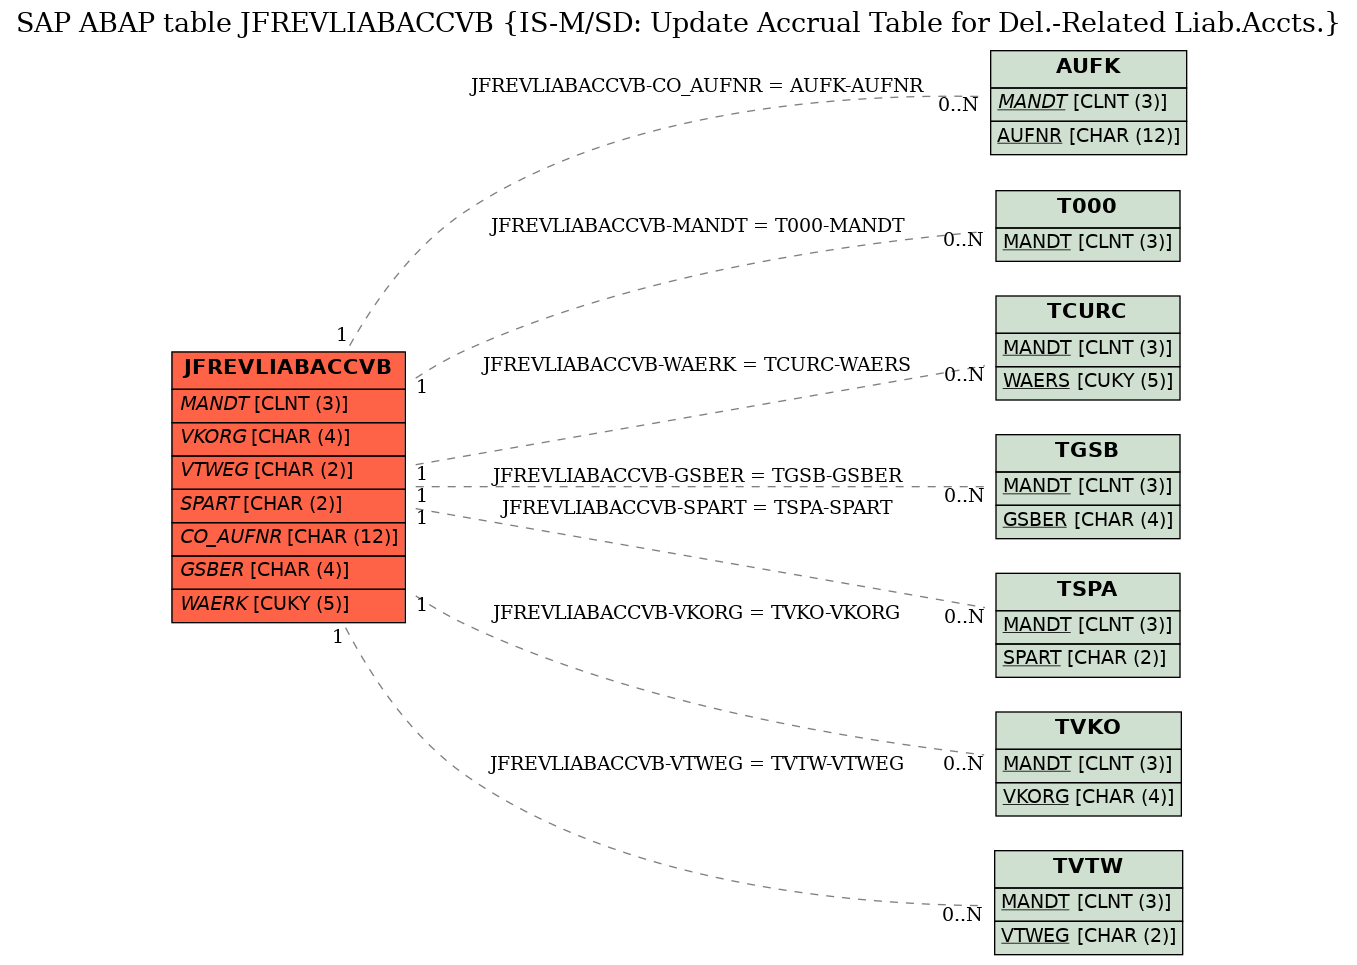 E-R Diagram for table JFREVLIABACCVB (IS-M/SD: Update Accrual Table for Del.-Related Liab.Accts.)